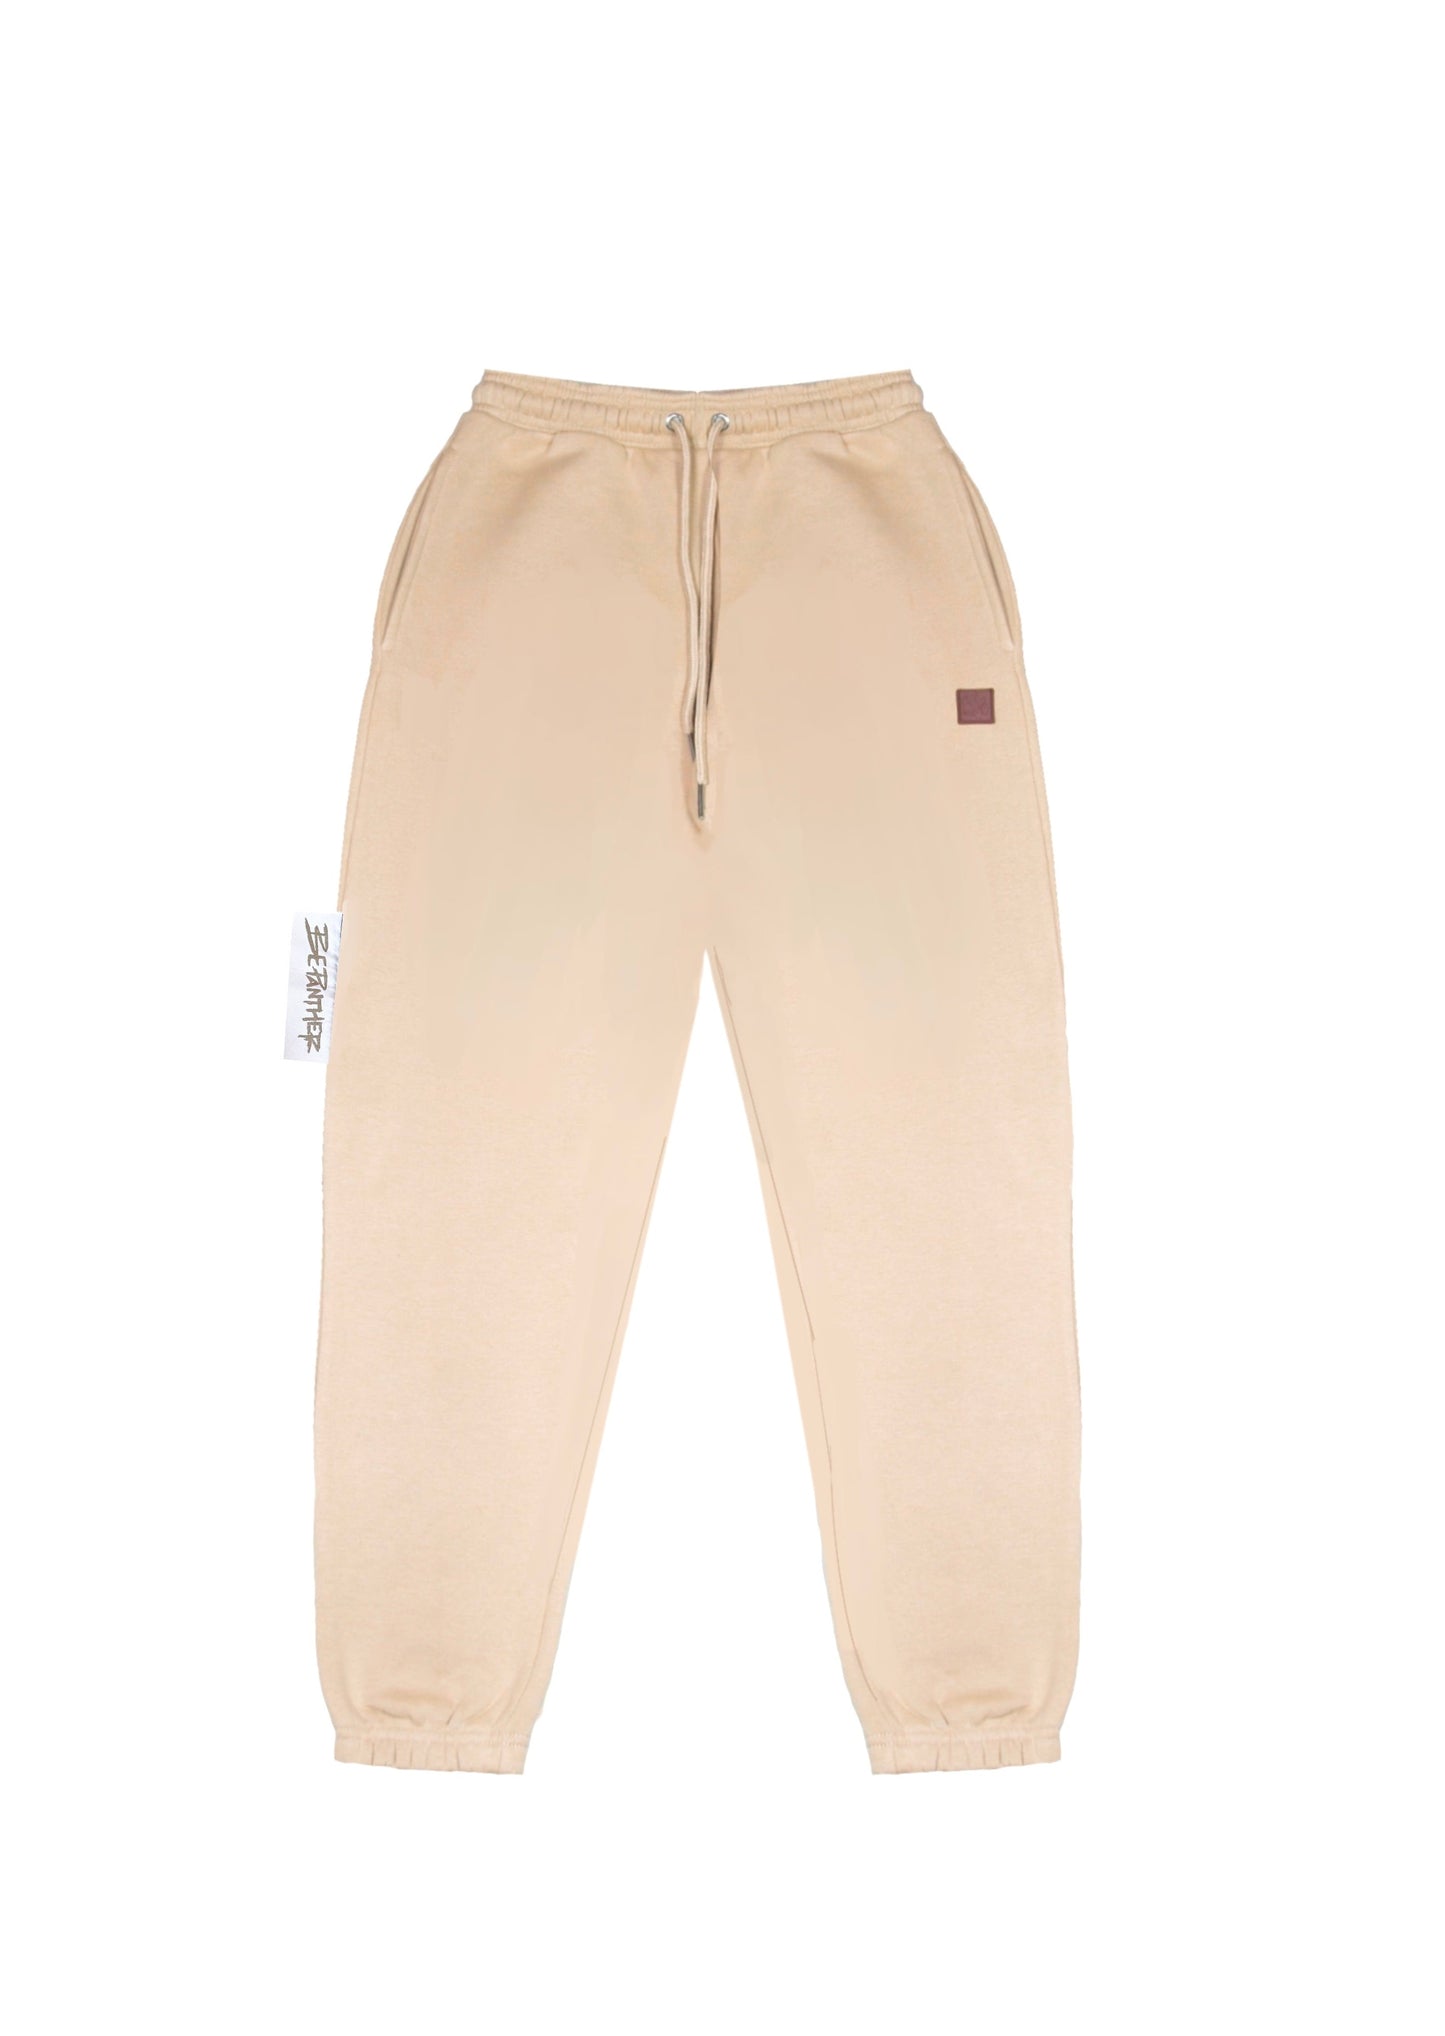 Be Panther Caramel Drizzle Sweatpants